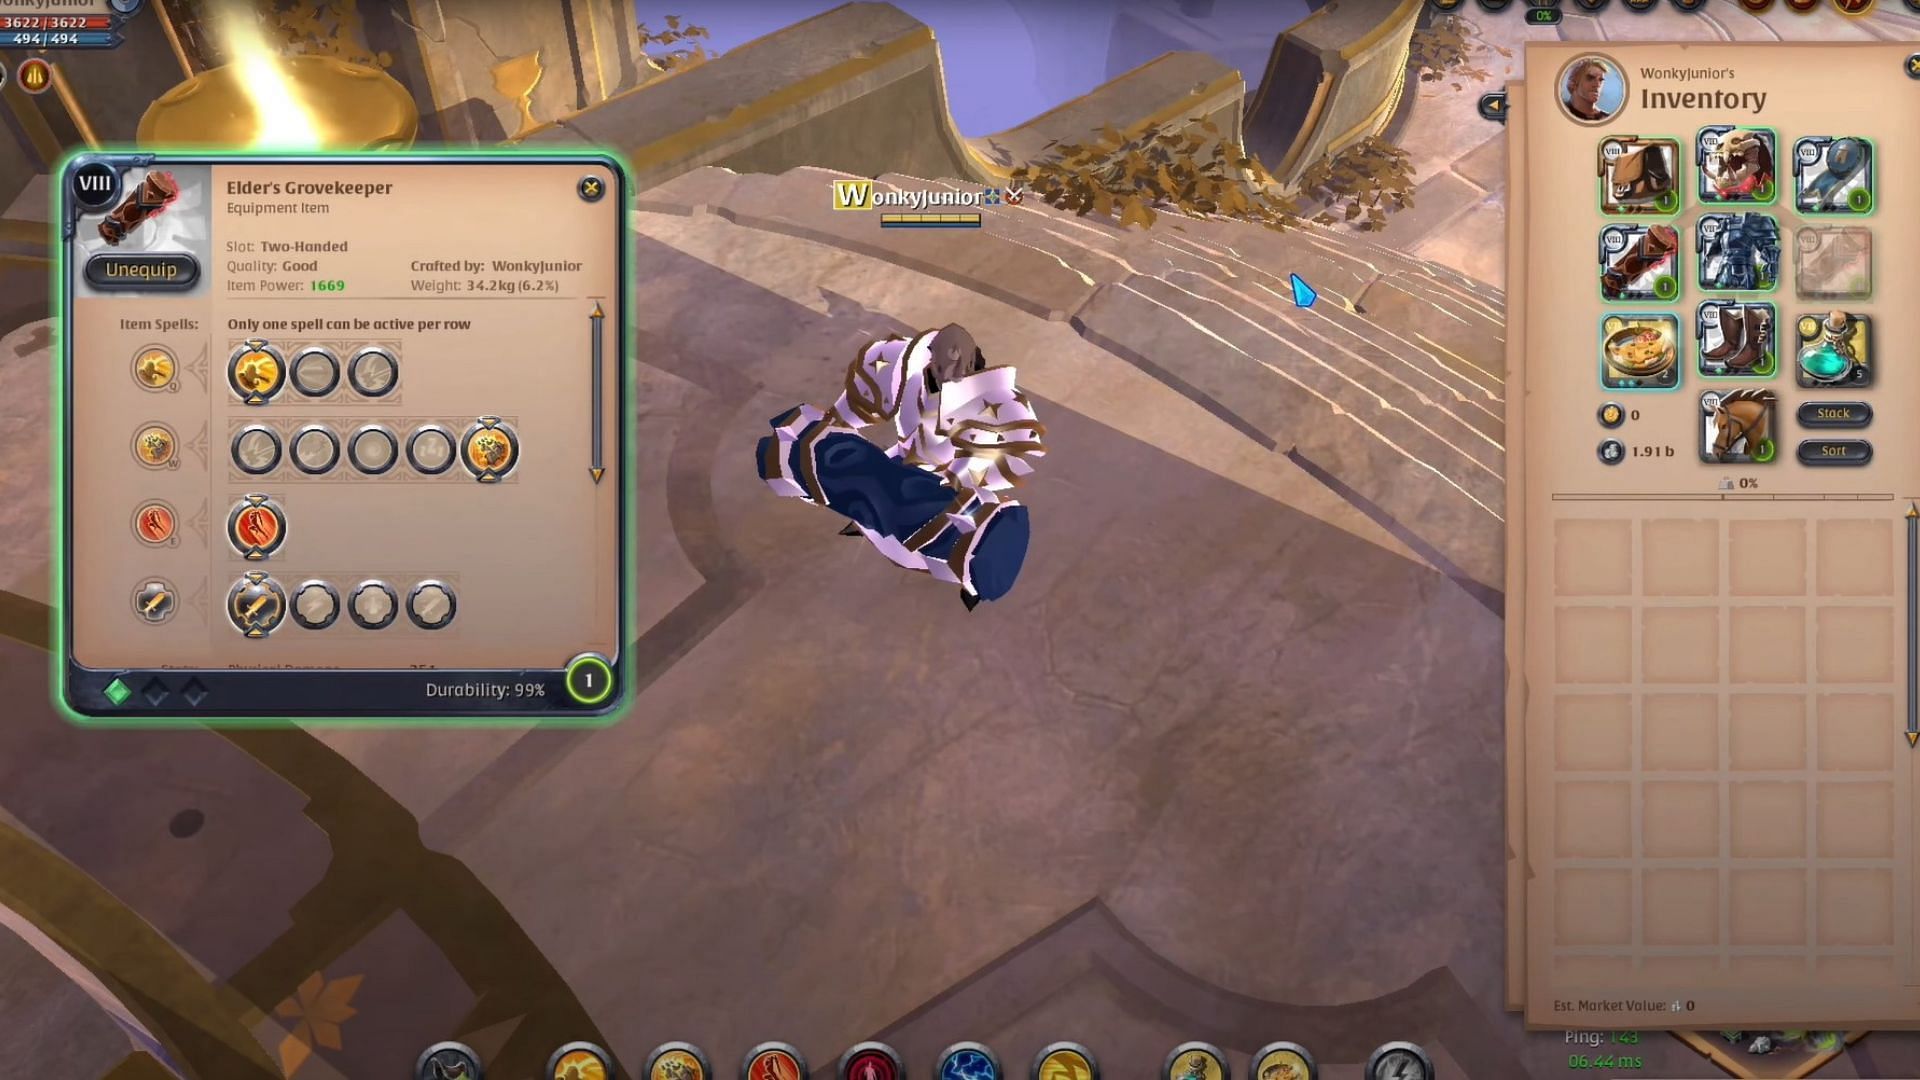 Grovekeeper is one of the best tank builds in Albion Online (Image via Sandbox Interactive)